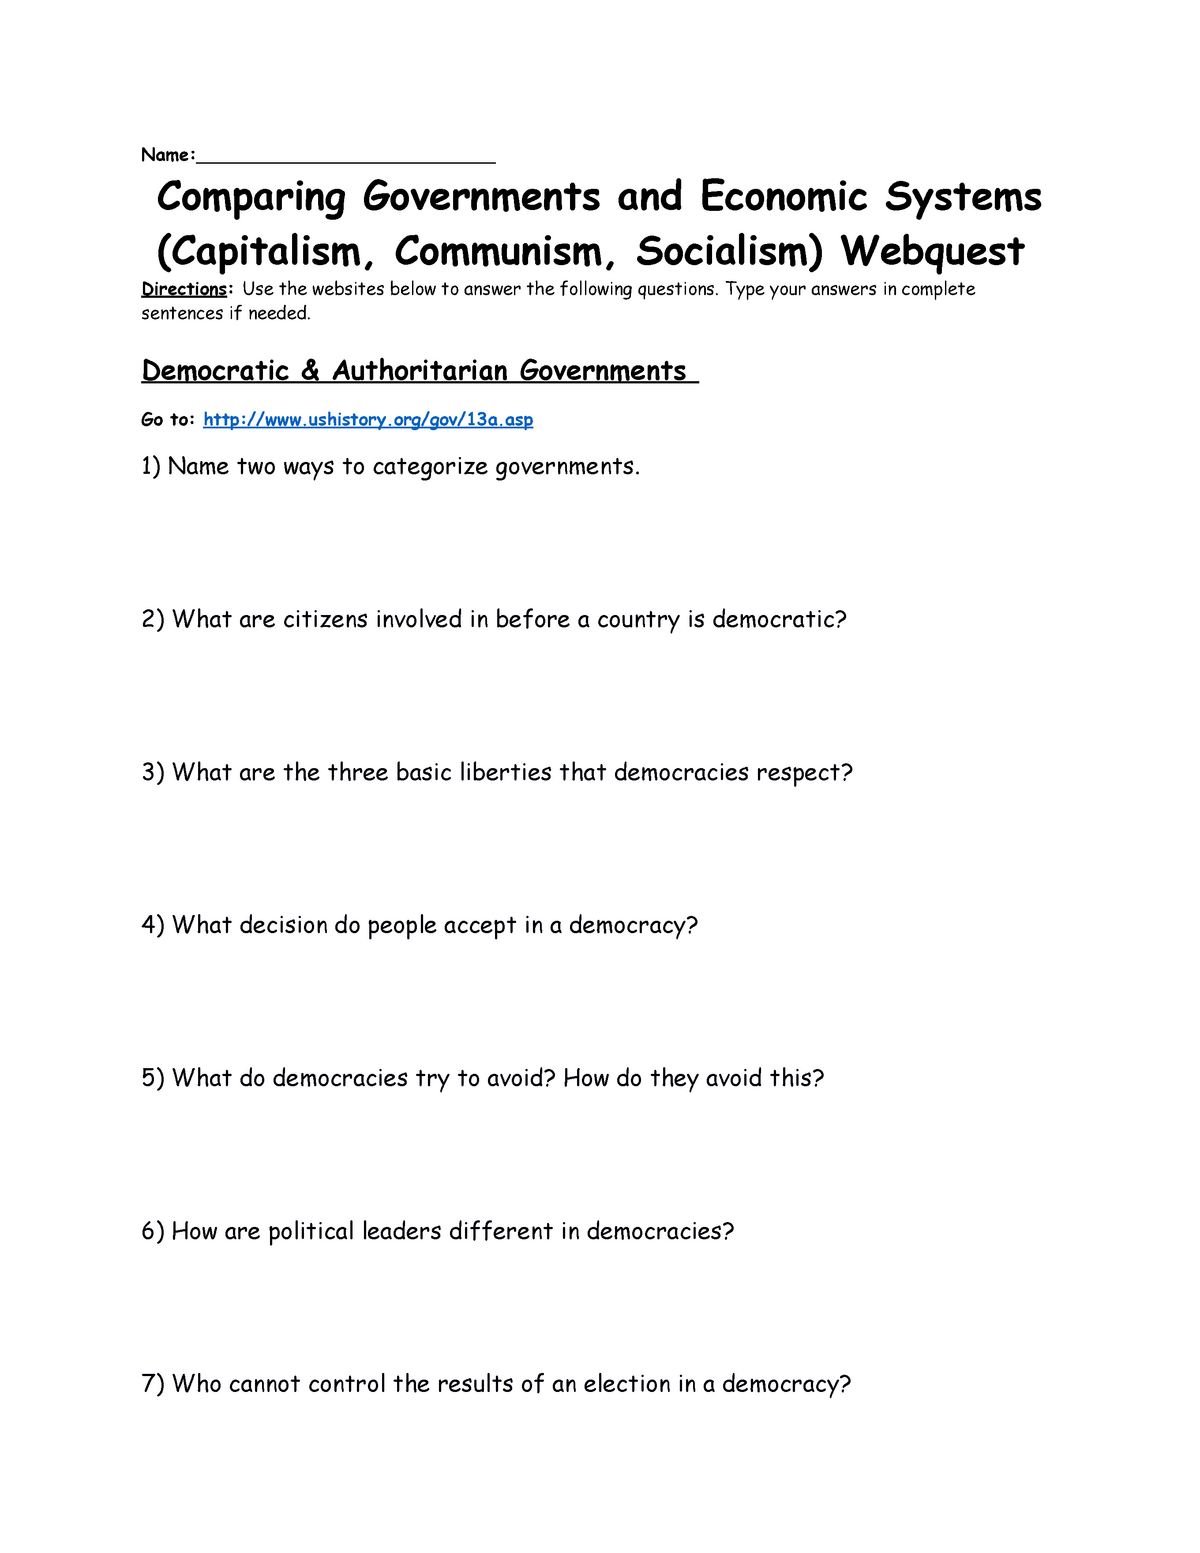 thesis questions about capitalism